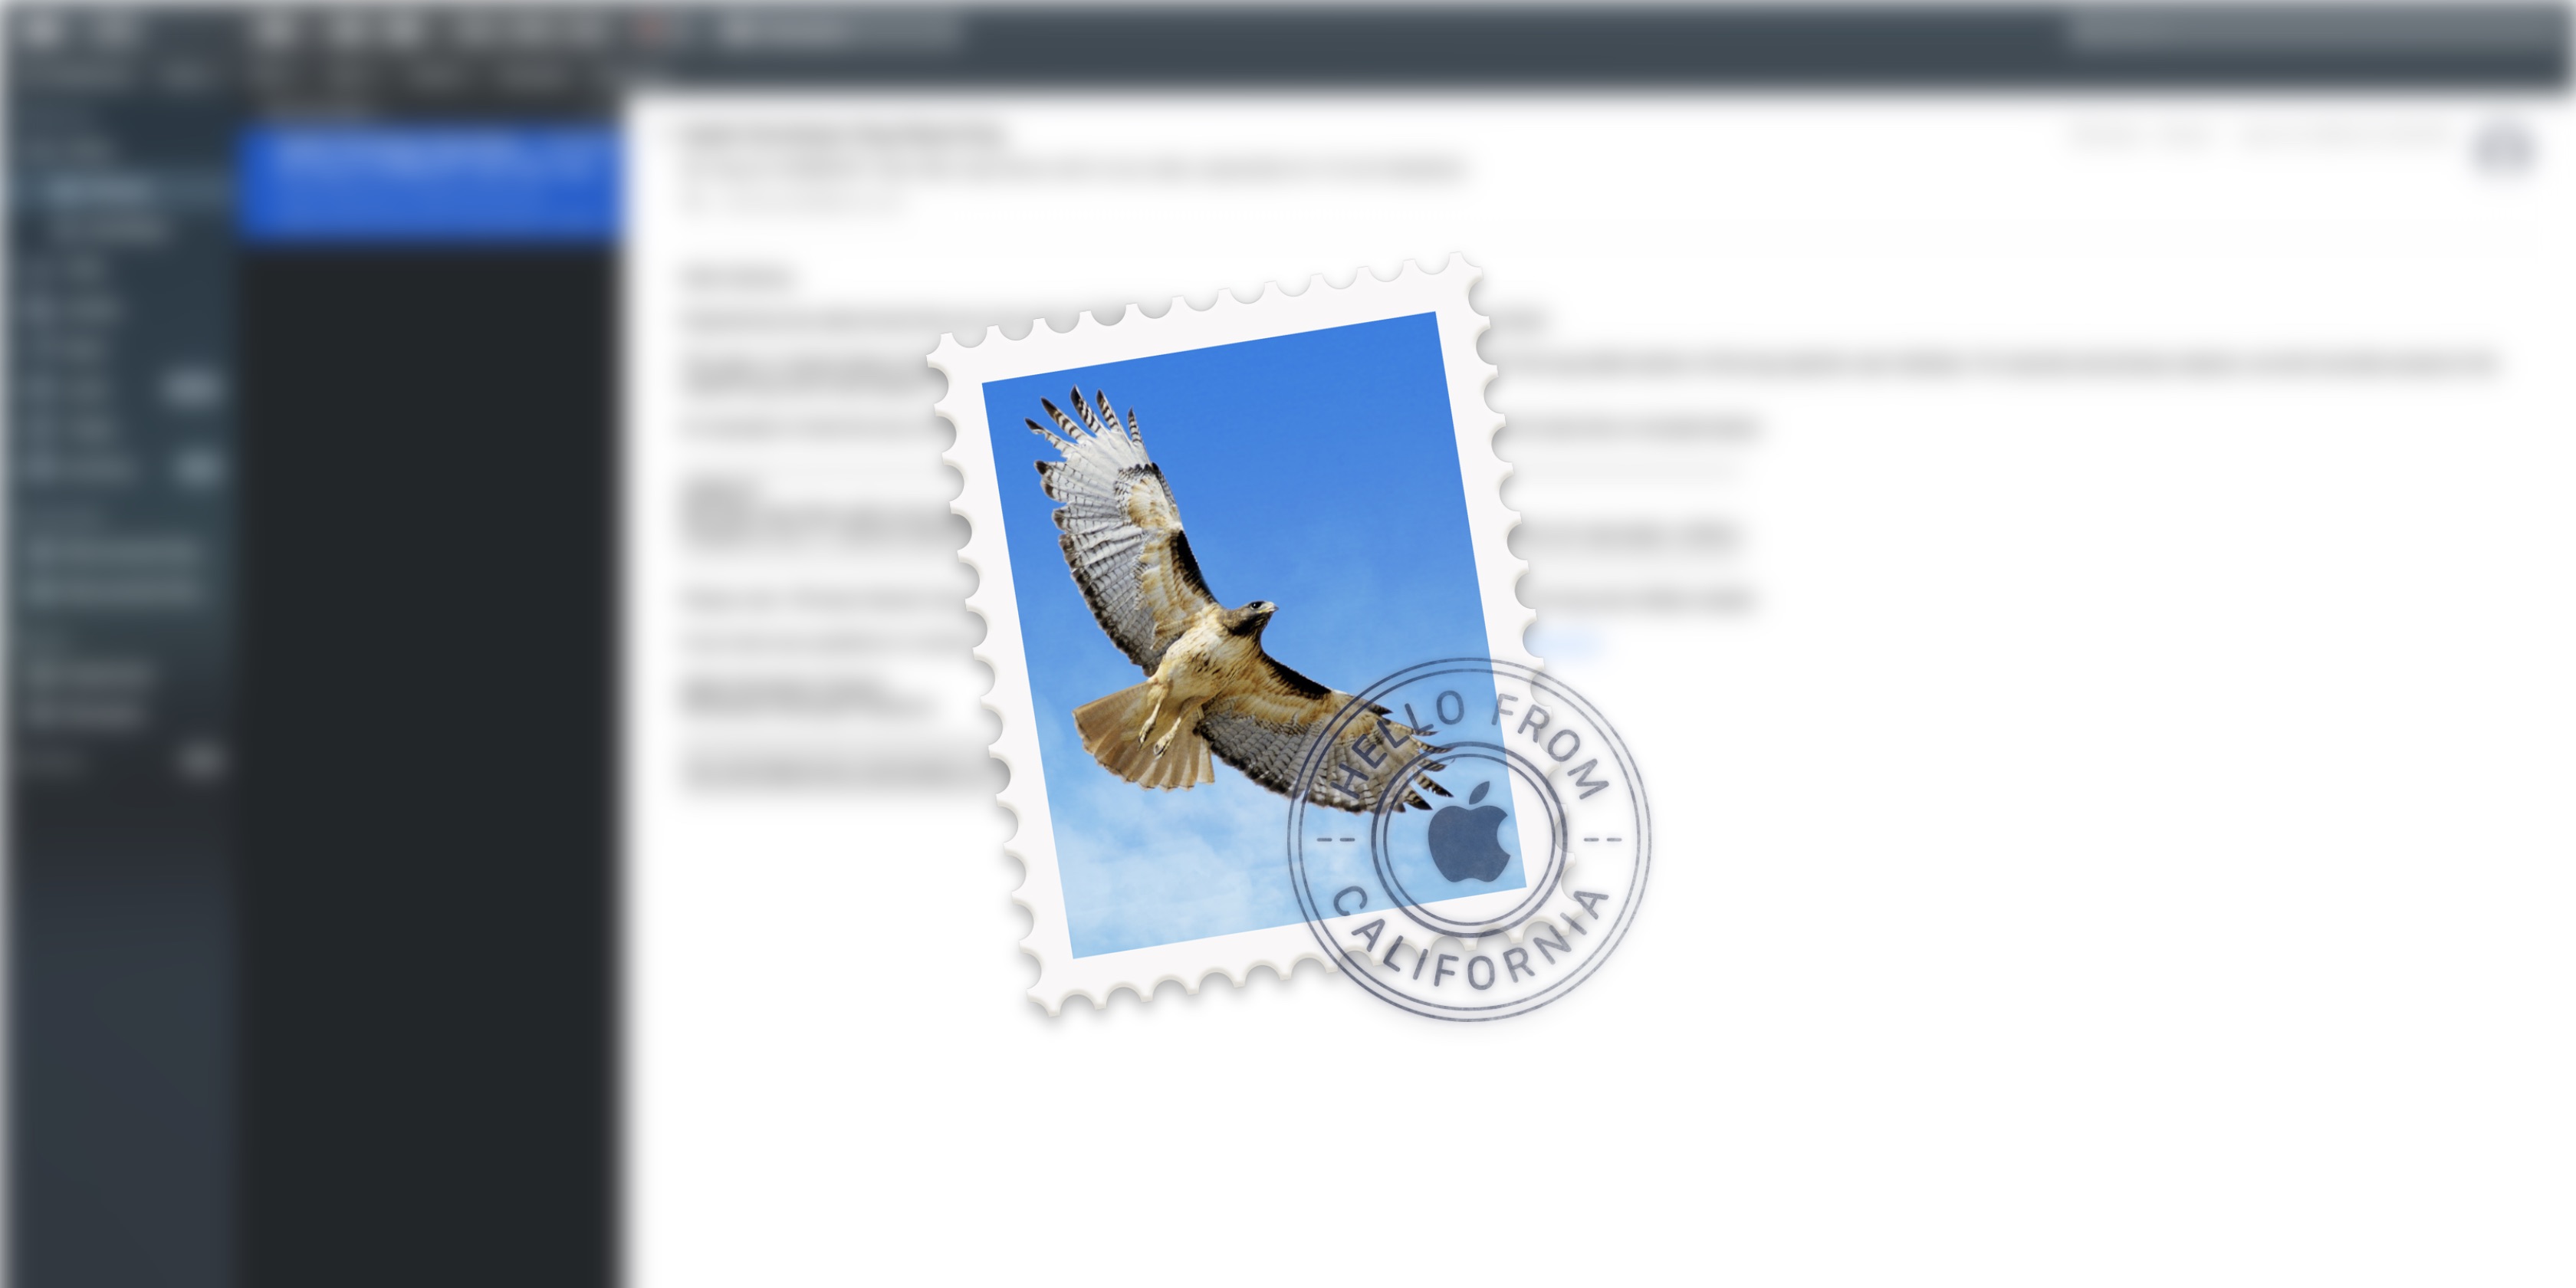 theme for email app mac